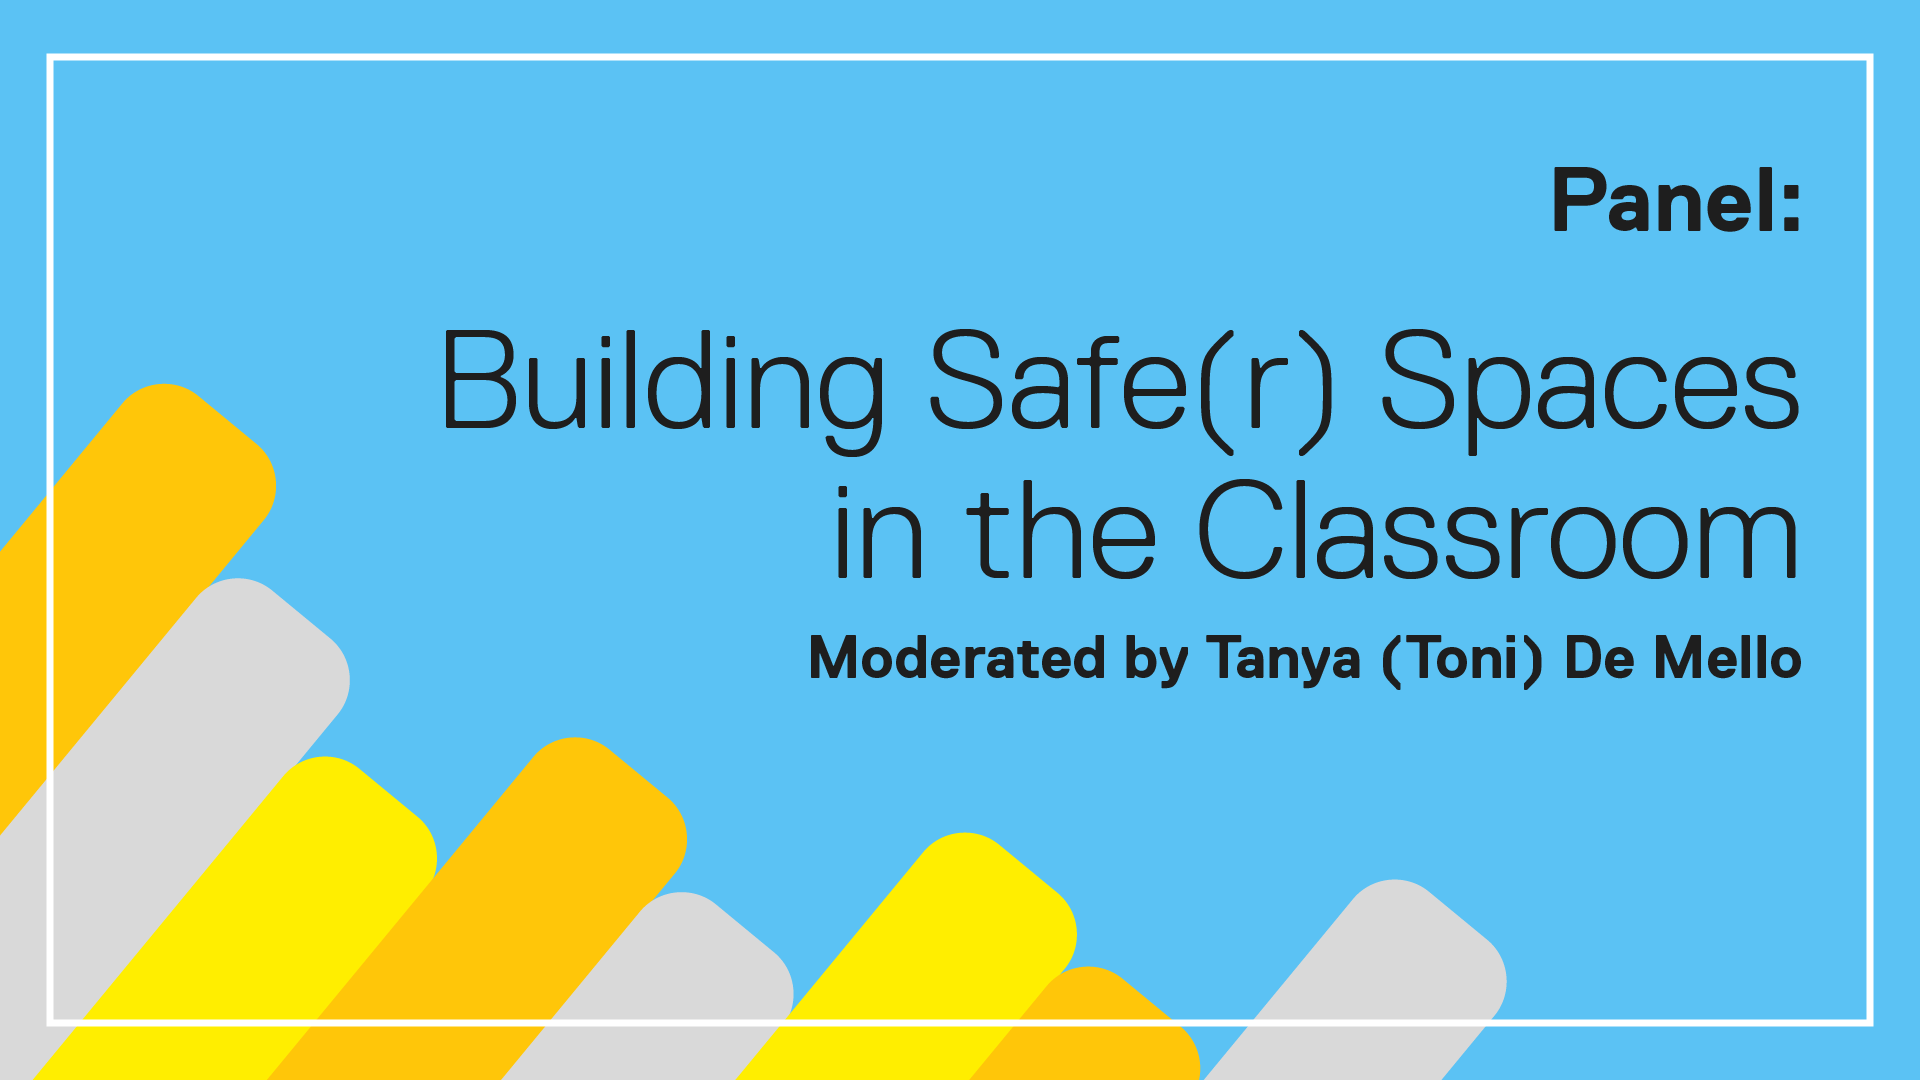 Panel: Building Safe(r) Spaces in the Classroom Moderated by Tanya (Toni) De Mello